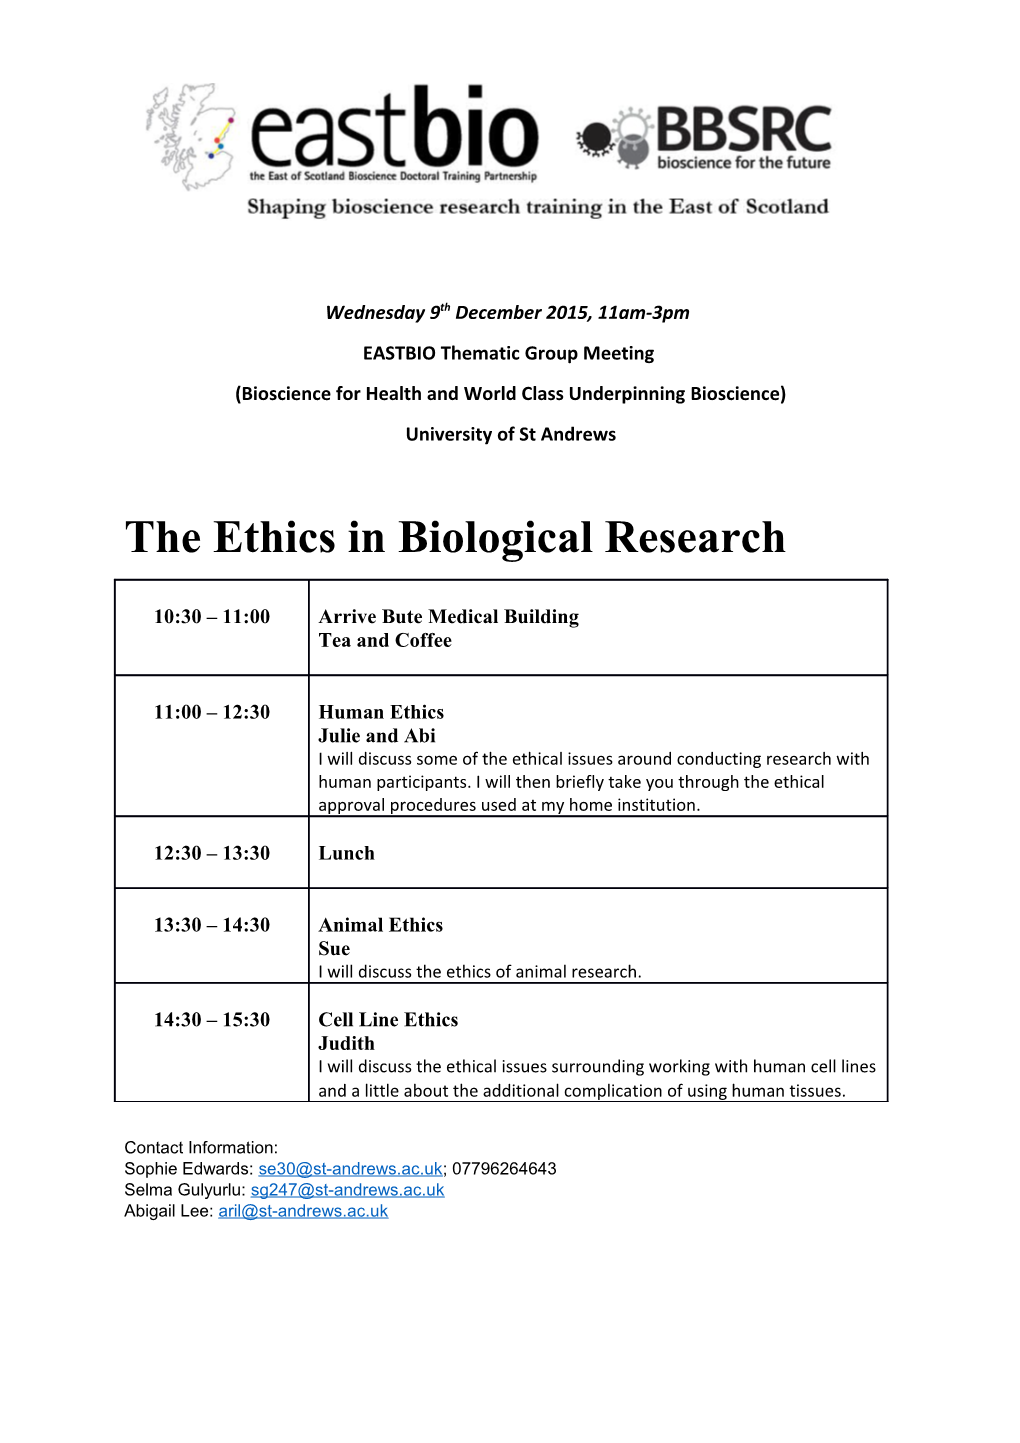 EASTBIO Thematic Group Meeting